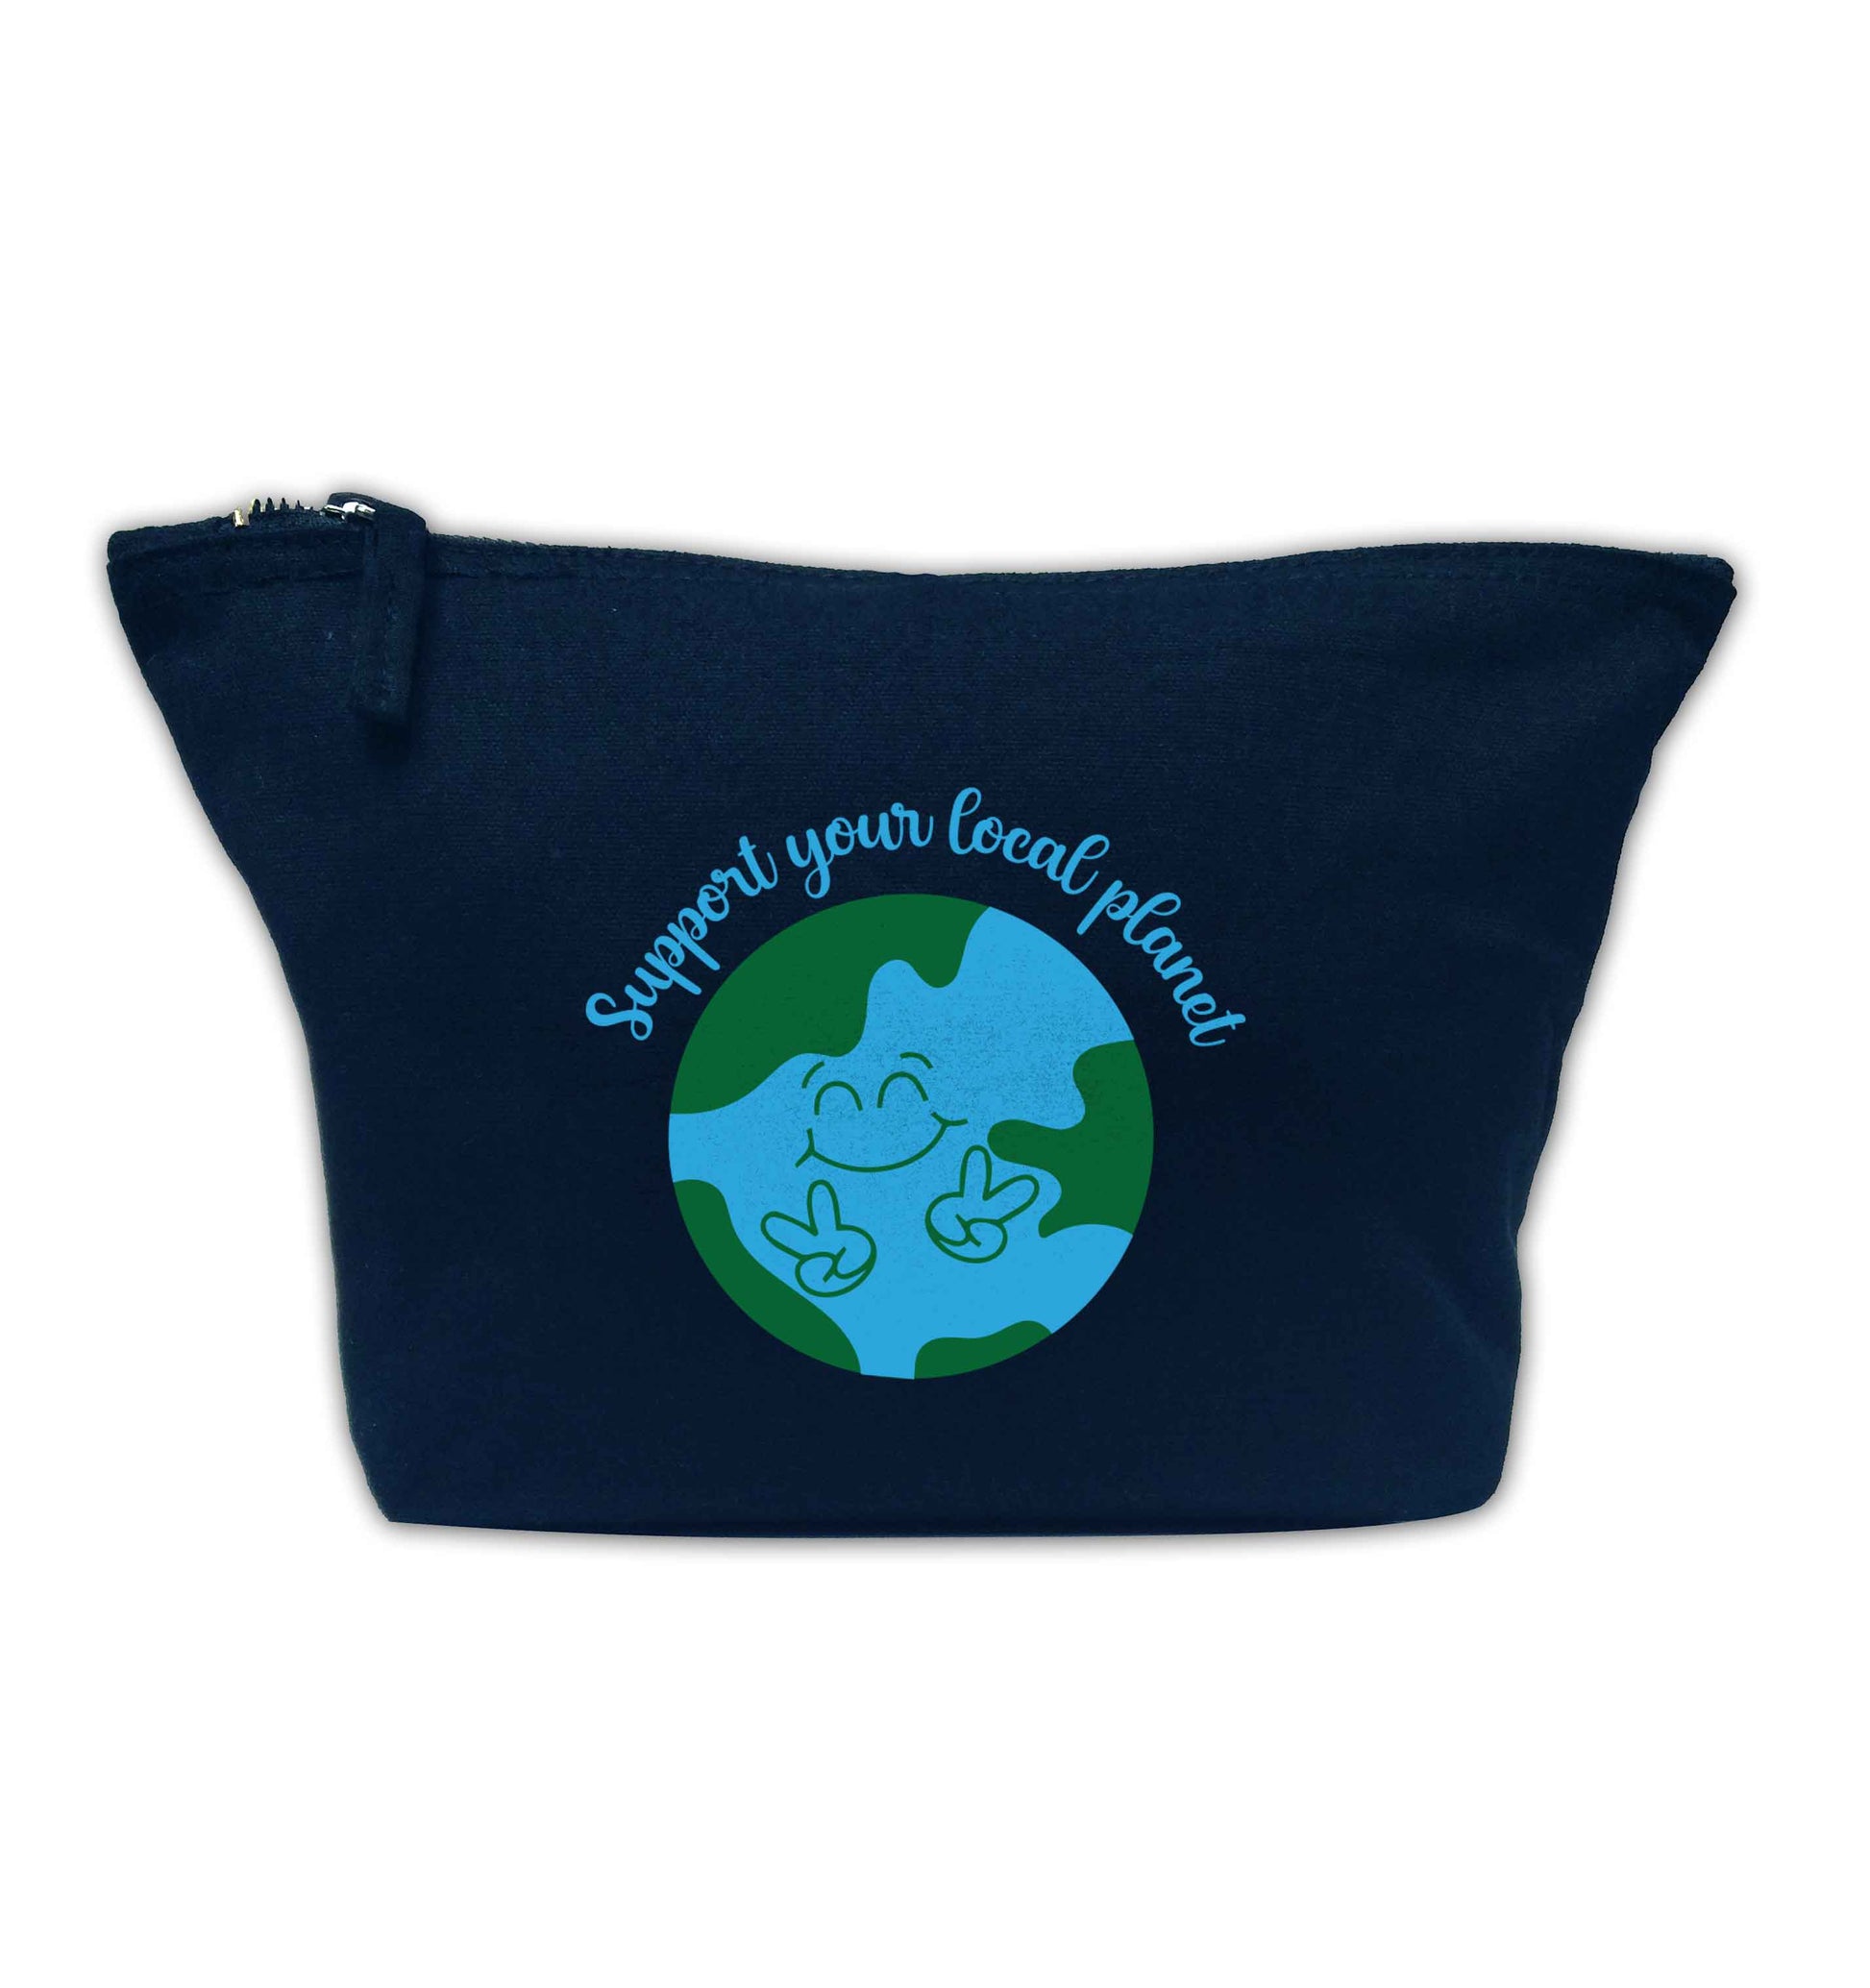 Support your local planet navy makeup bag